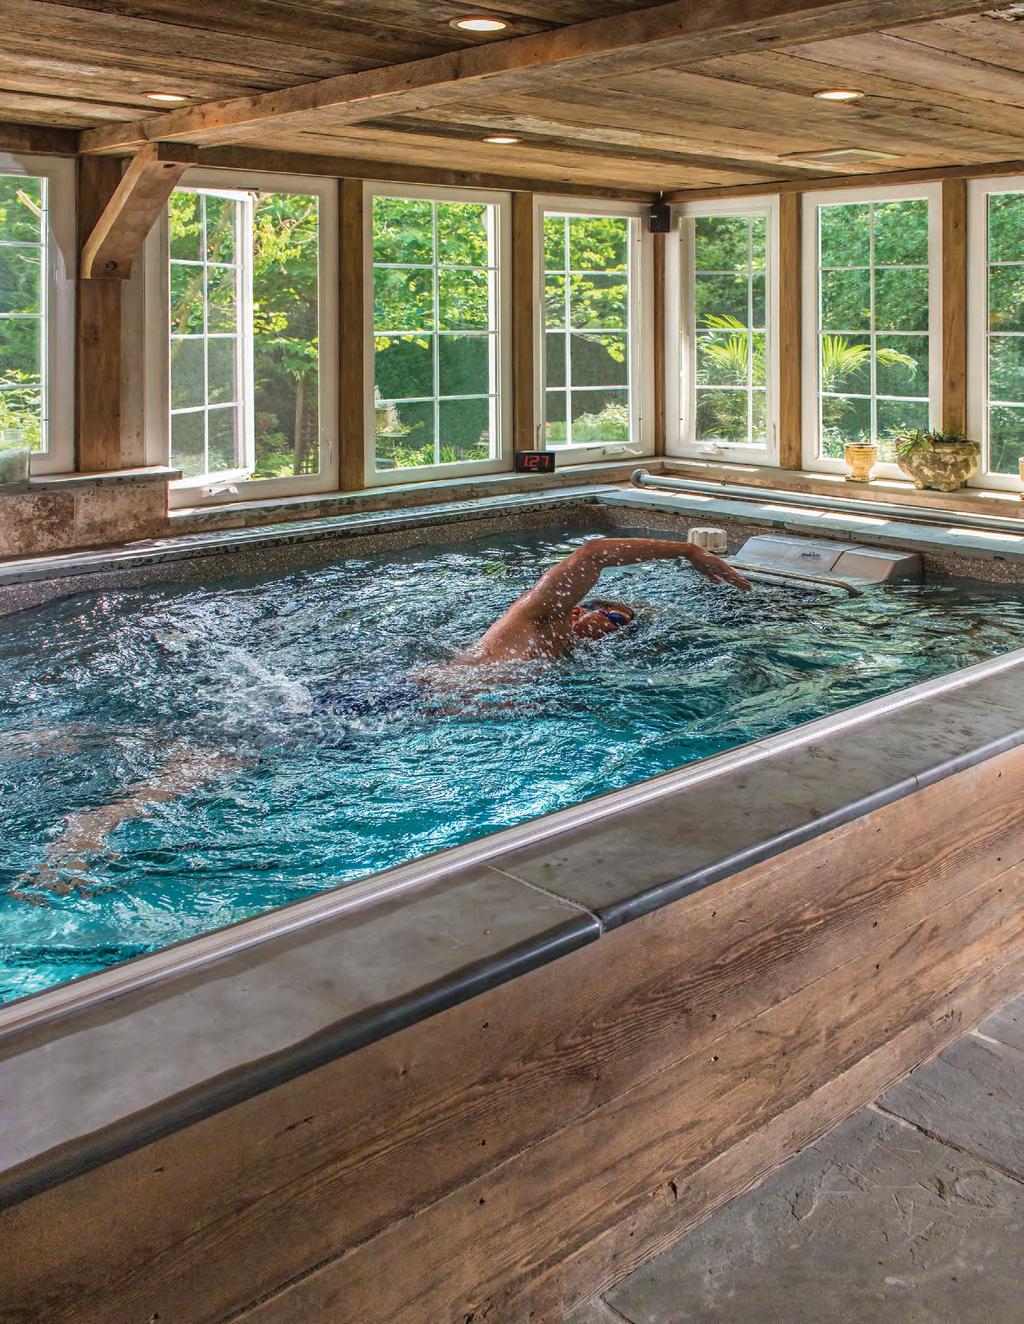 When Exercise is a Pleasure, Fitness is Easy The Endless Pool combines the joy of swimming and aquatic activity with at-home convenience, indoors or out.